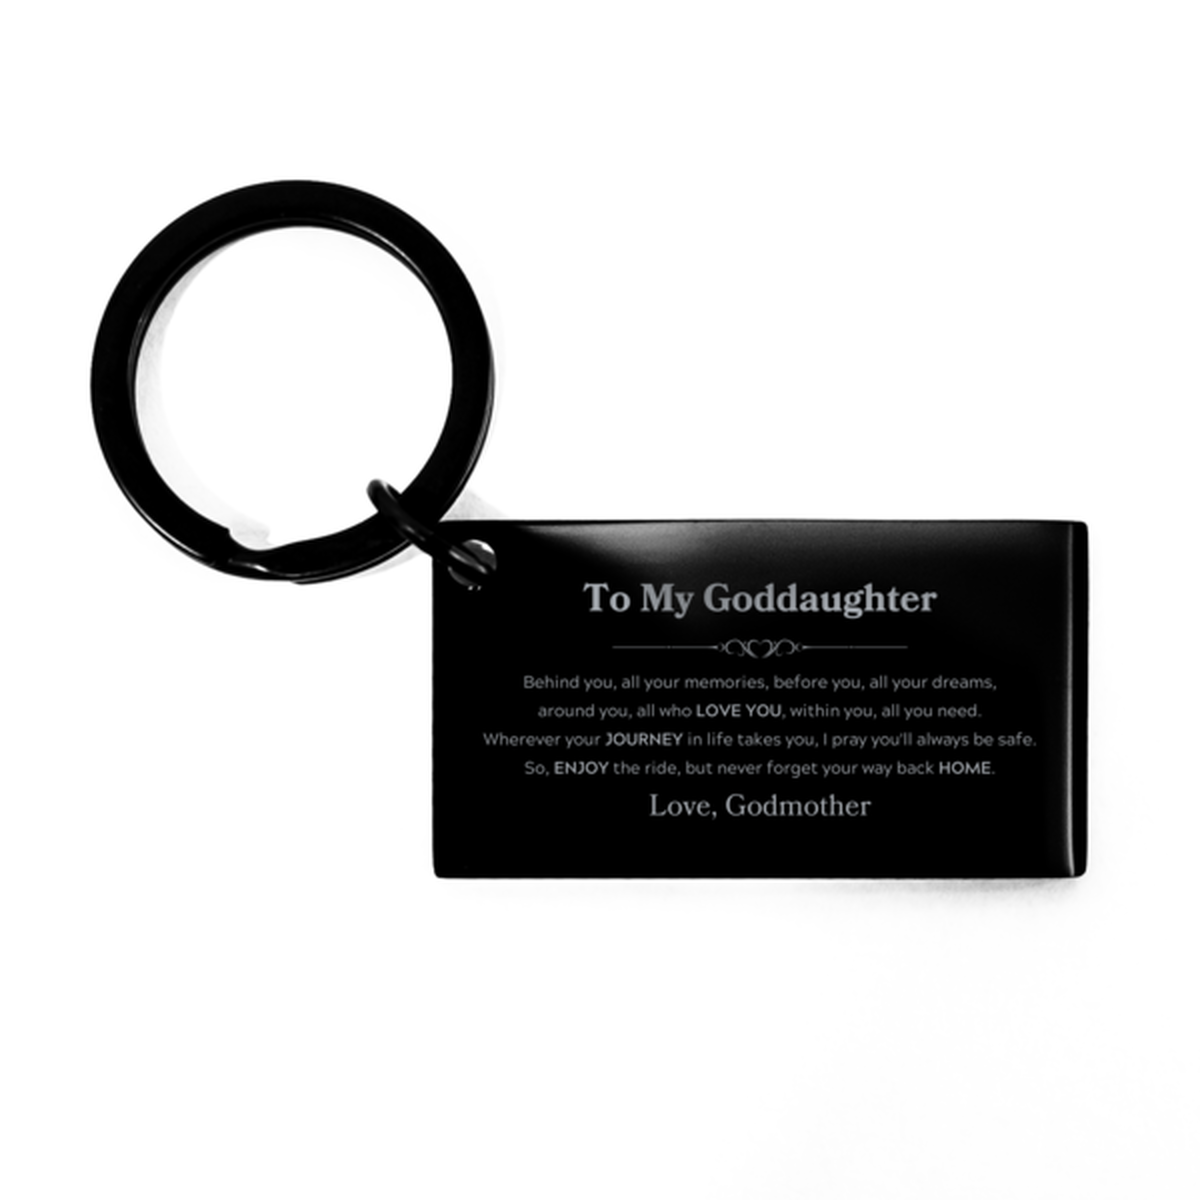 To My Goddaughter Graduation Gifts from Godmother, Goddaughter Keychain Christmas Birthday Gifts for Goddaughter Behind you, all your memories, before you, all your dreams. Love, Godmother